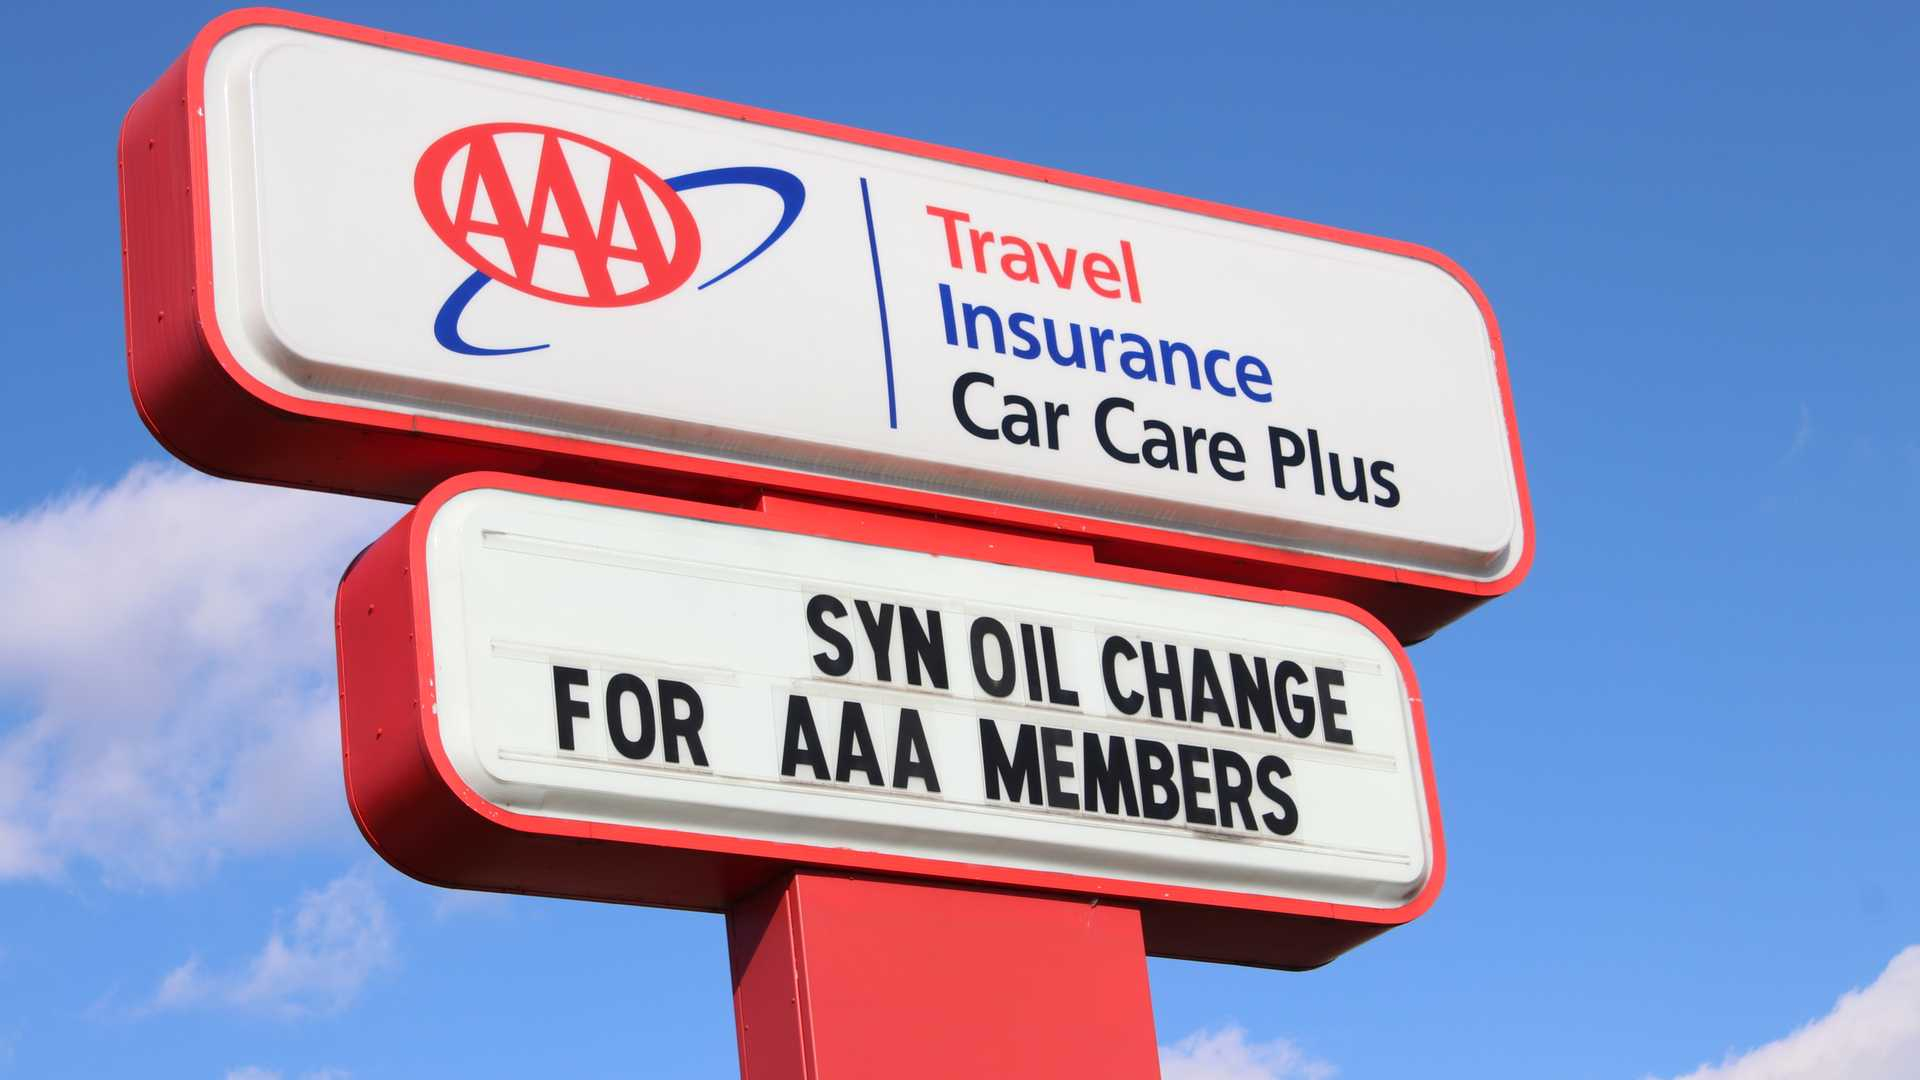 Aaa Car Insurance Review 2020 for size 1920 X 1080